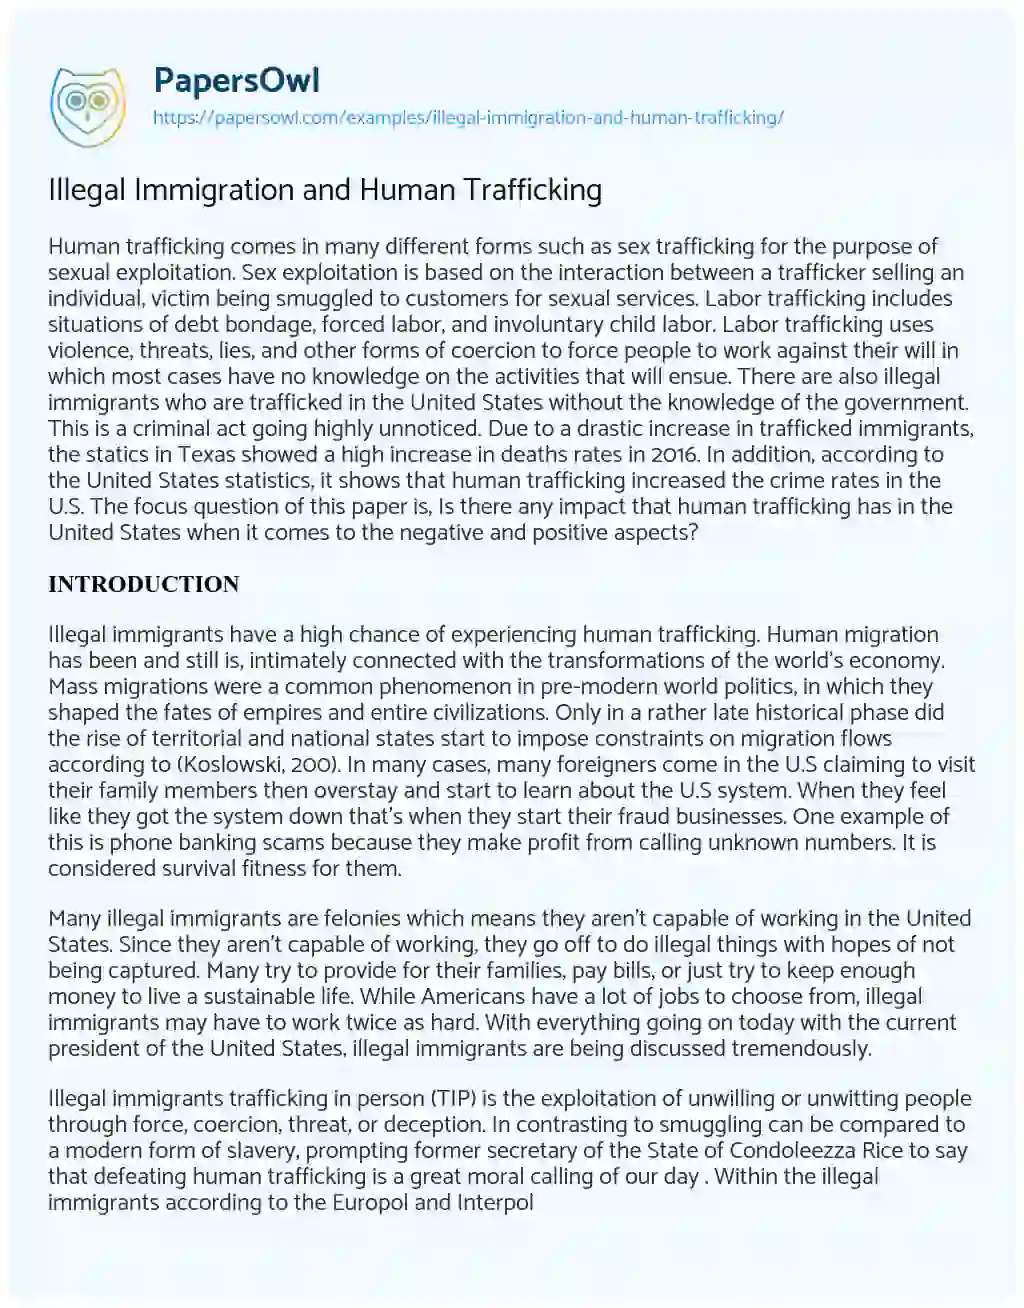 Illegal Immigration and Human Trafficking essay